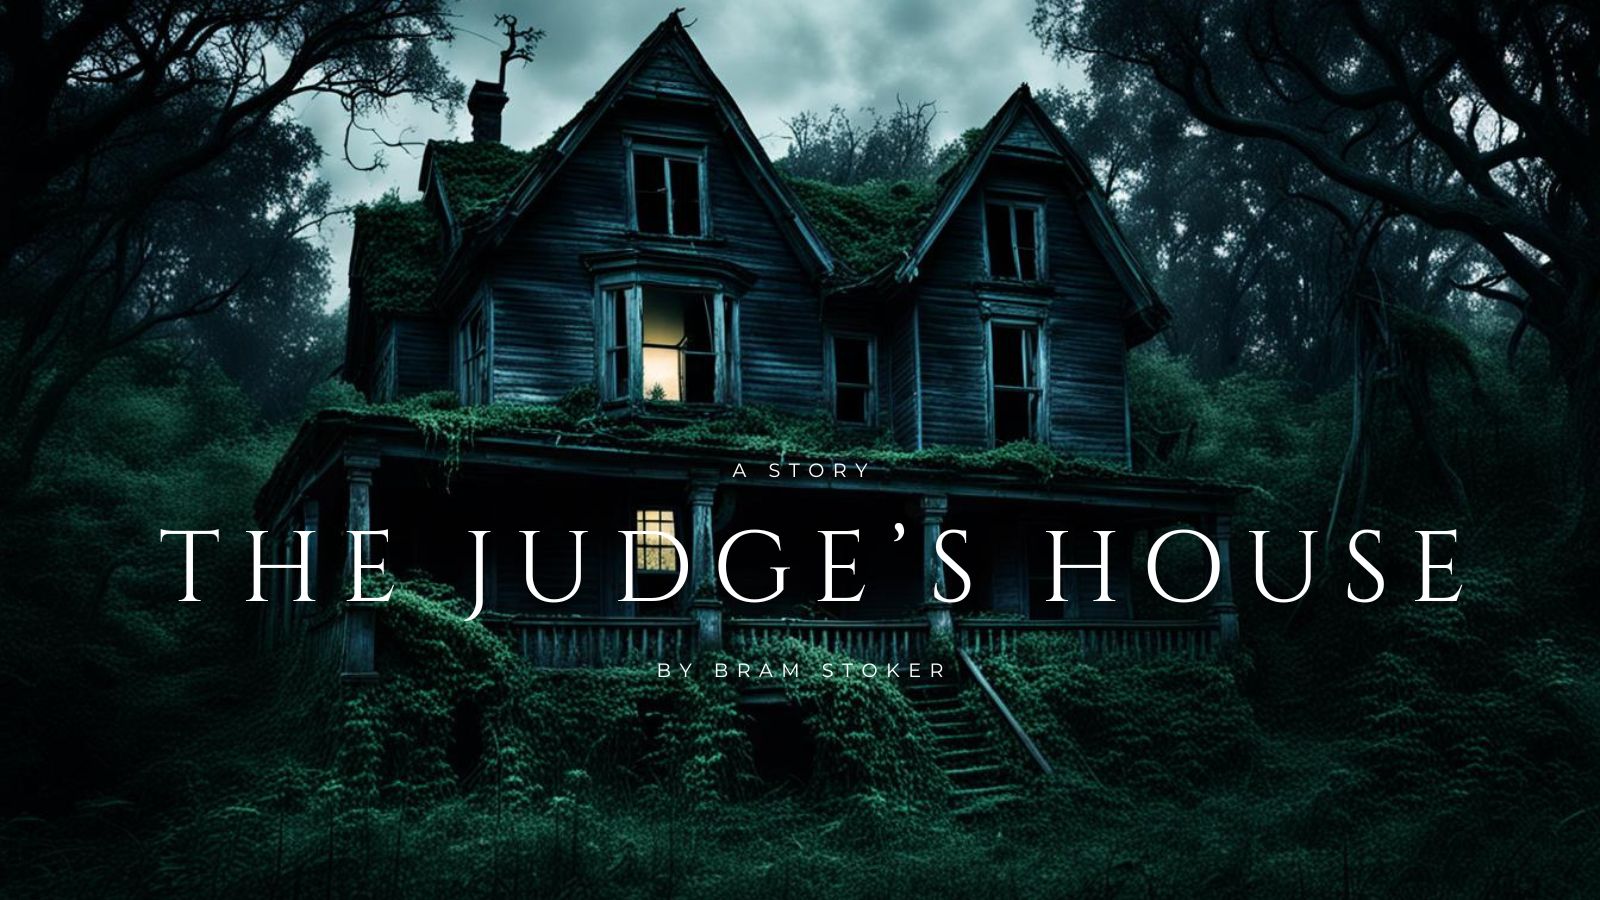 The Judge’s House by Bram Stoker 